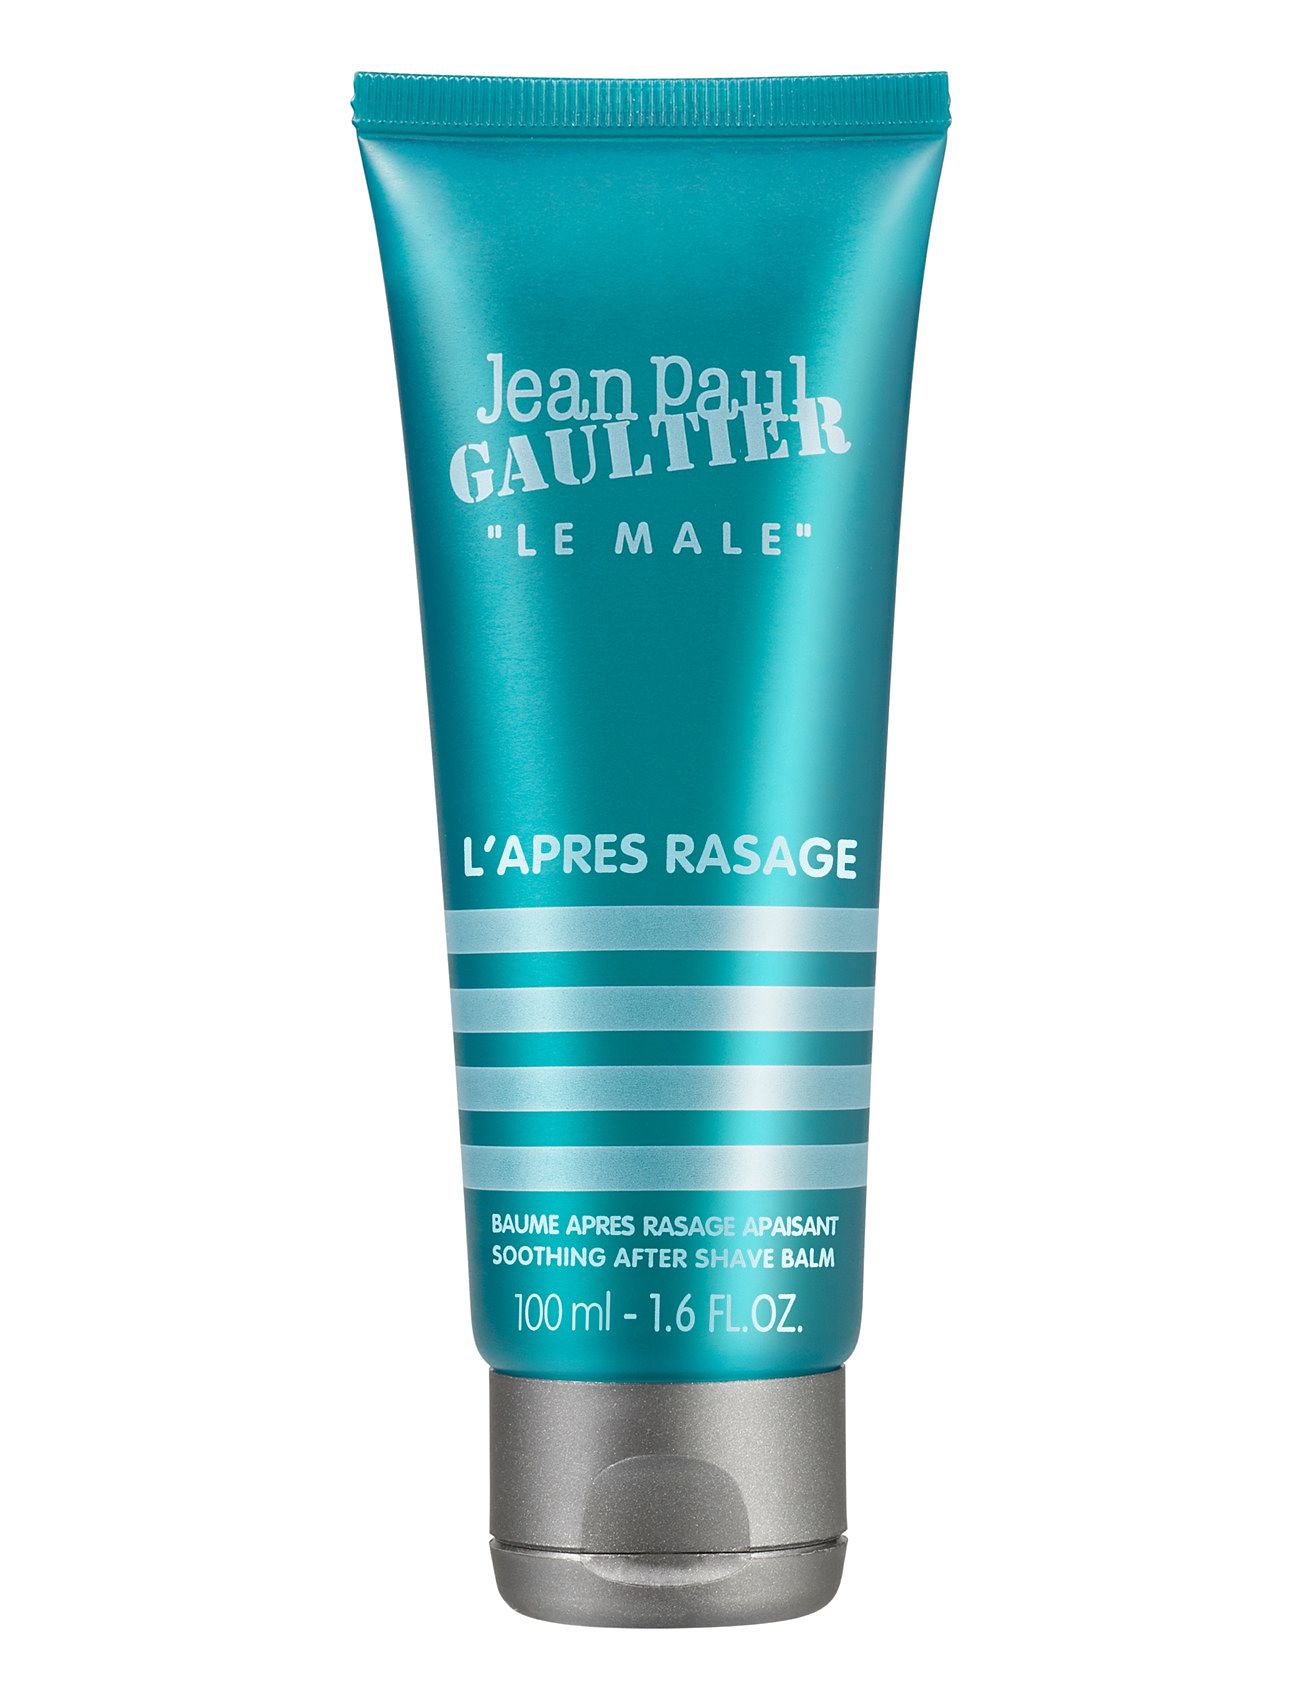 Le Male Soothingalchohol-Free After Shave Balm Beauty Men Shaving Products After Shave Nude Jean Paul Gaultier